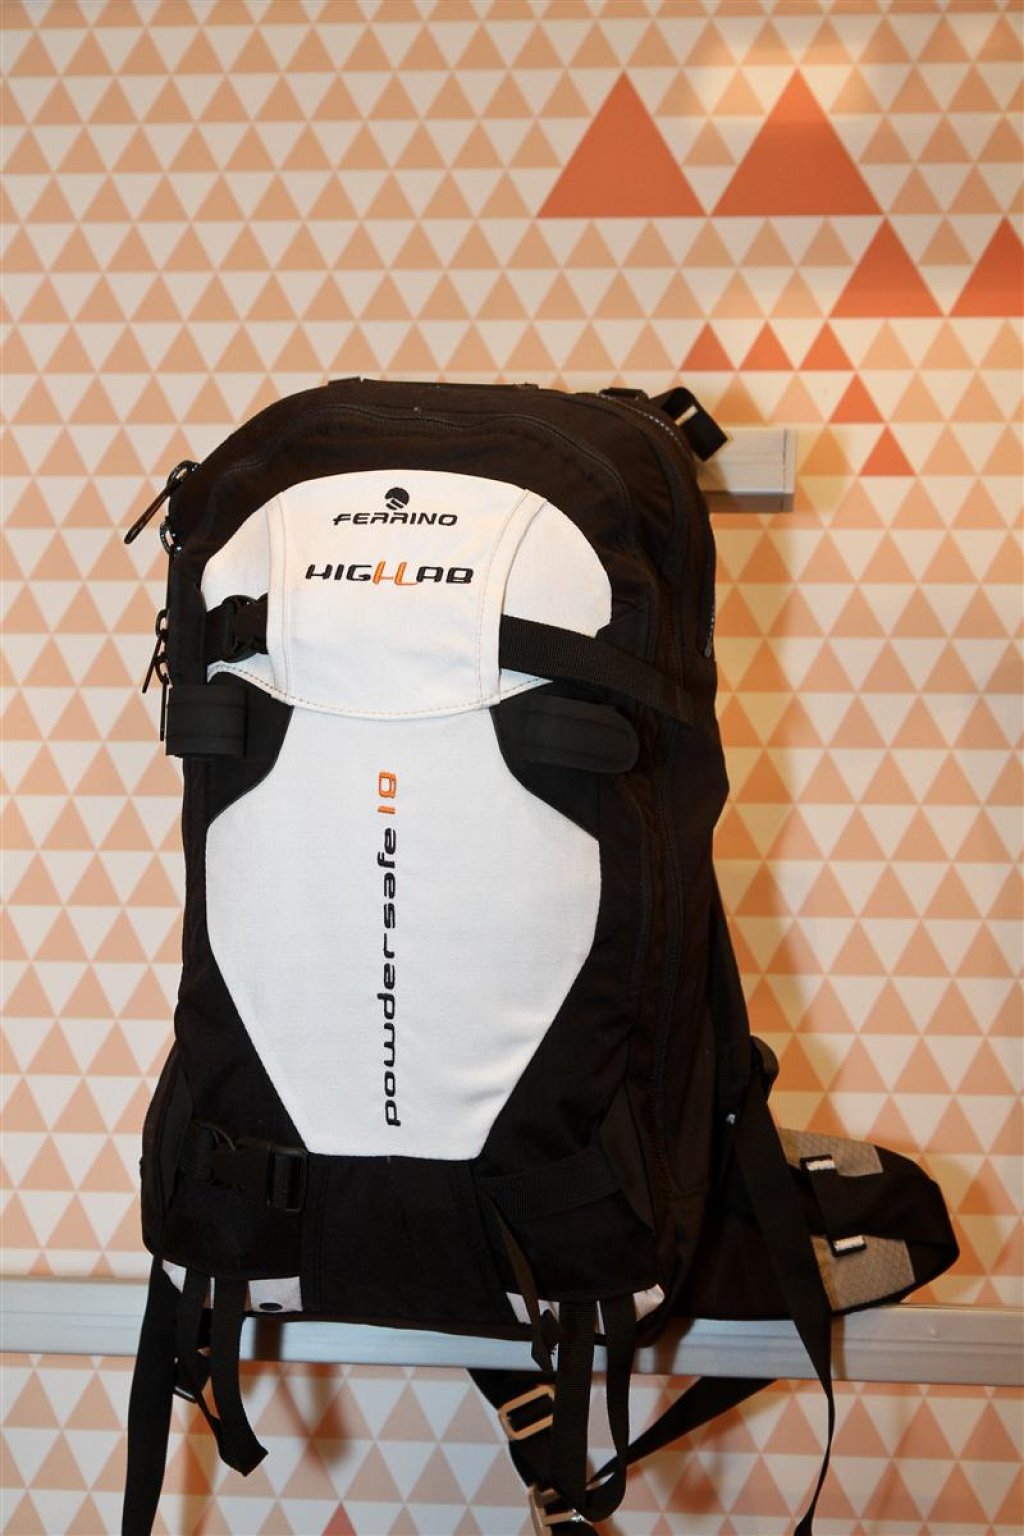 Ferrino also offers an R.A.S. backpack